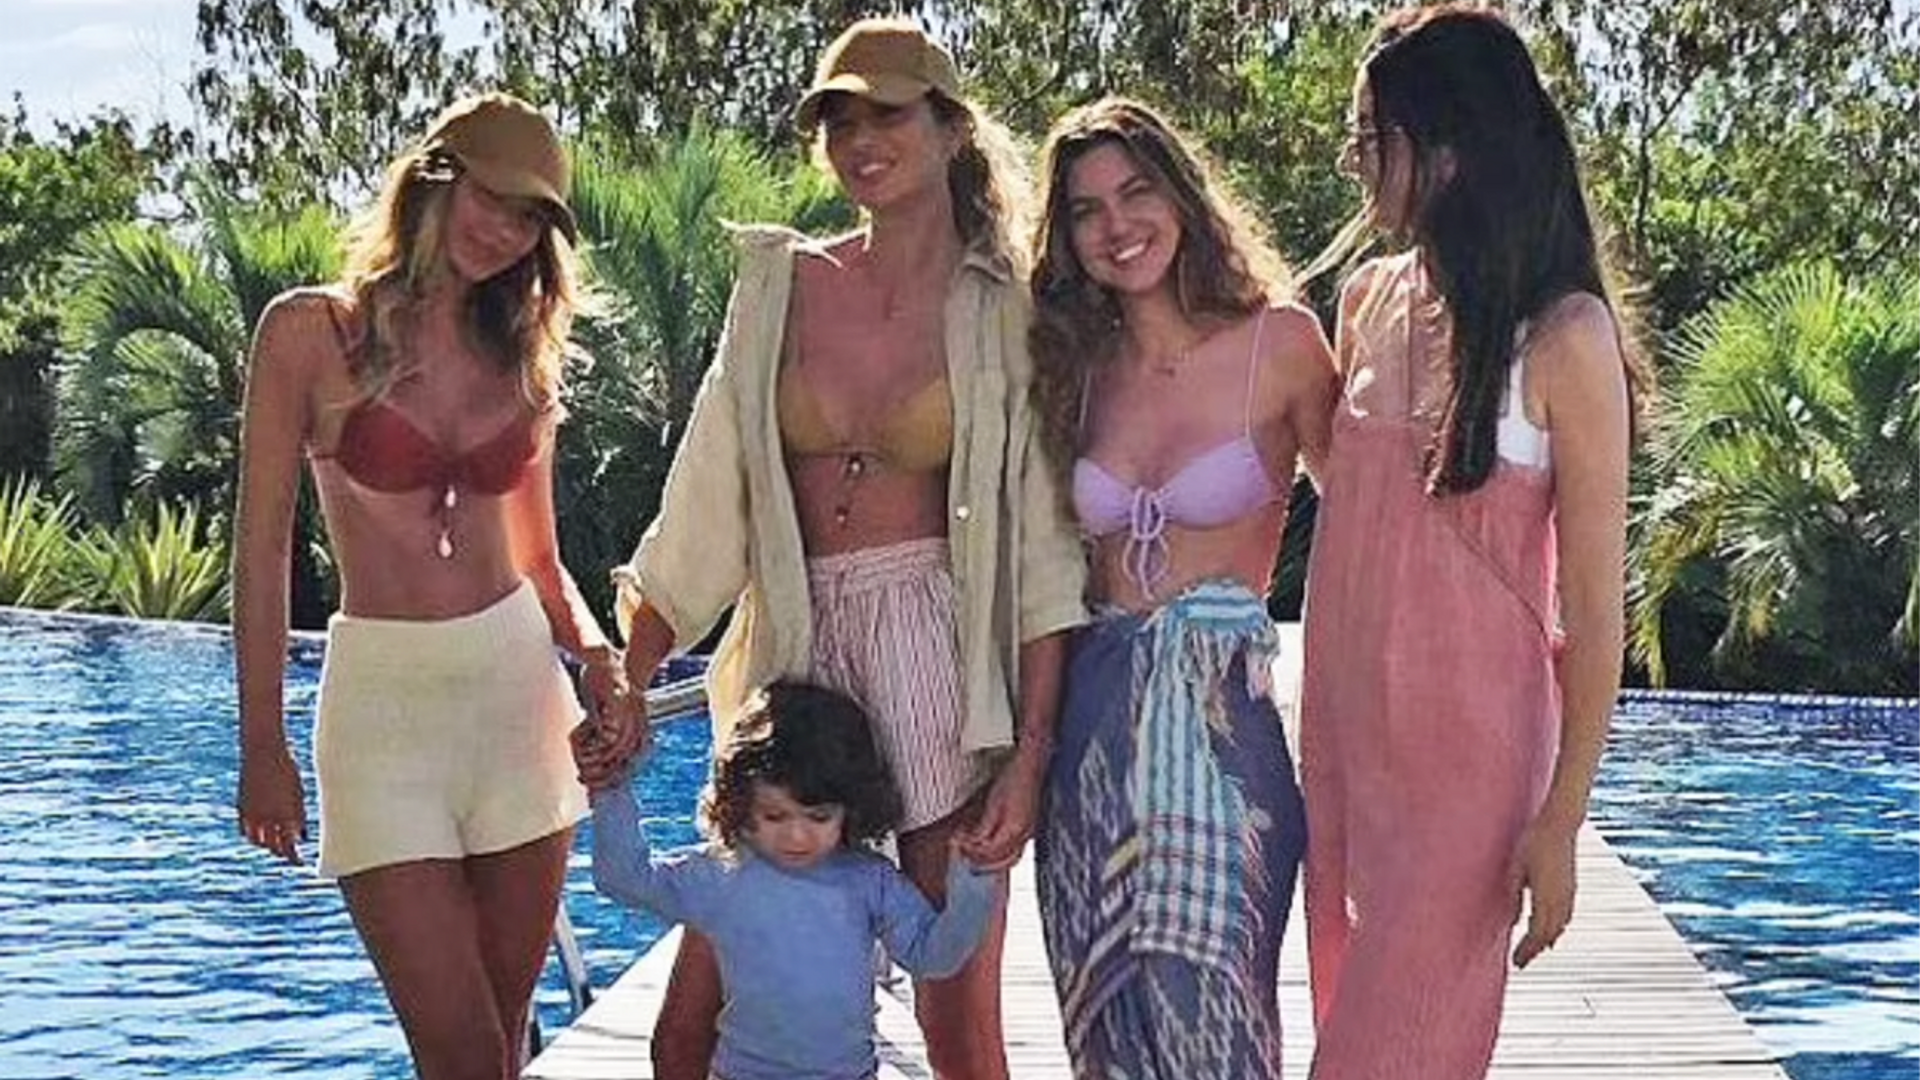 Gisele Bundchen shares snap with sisters